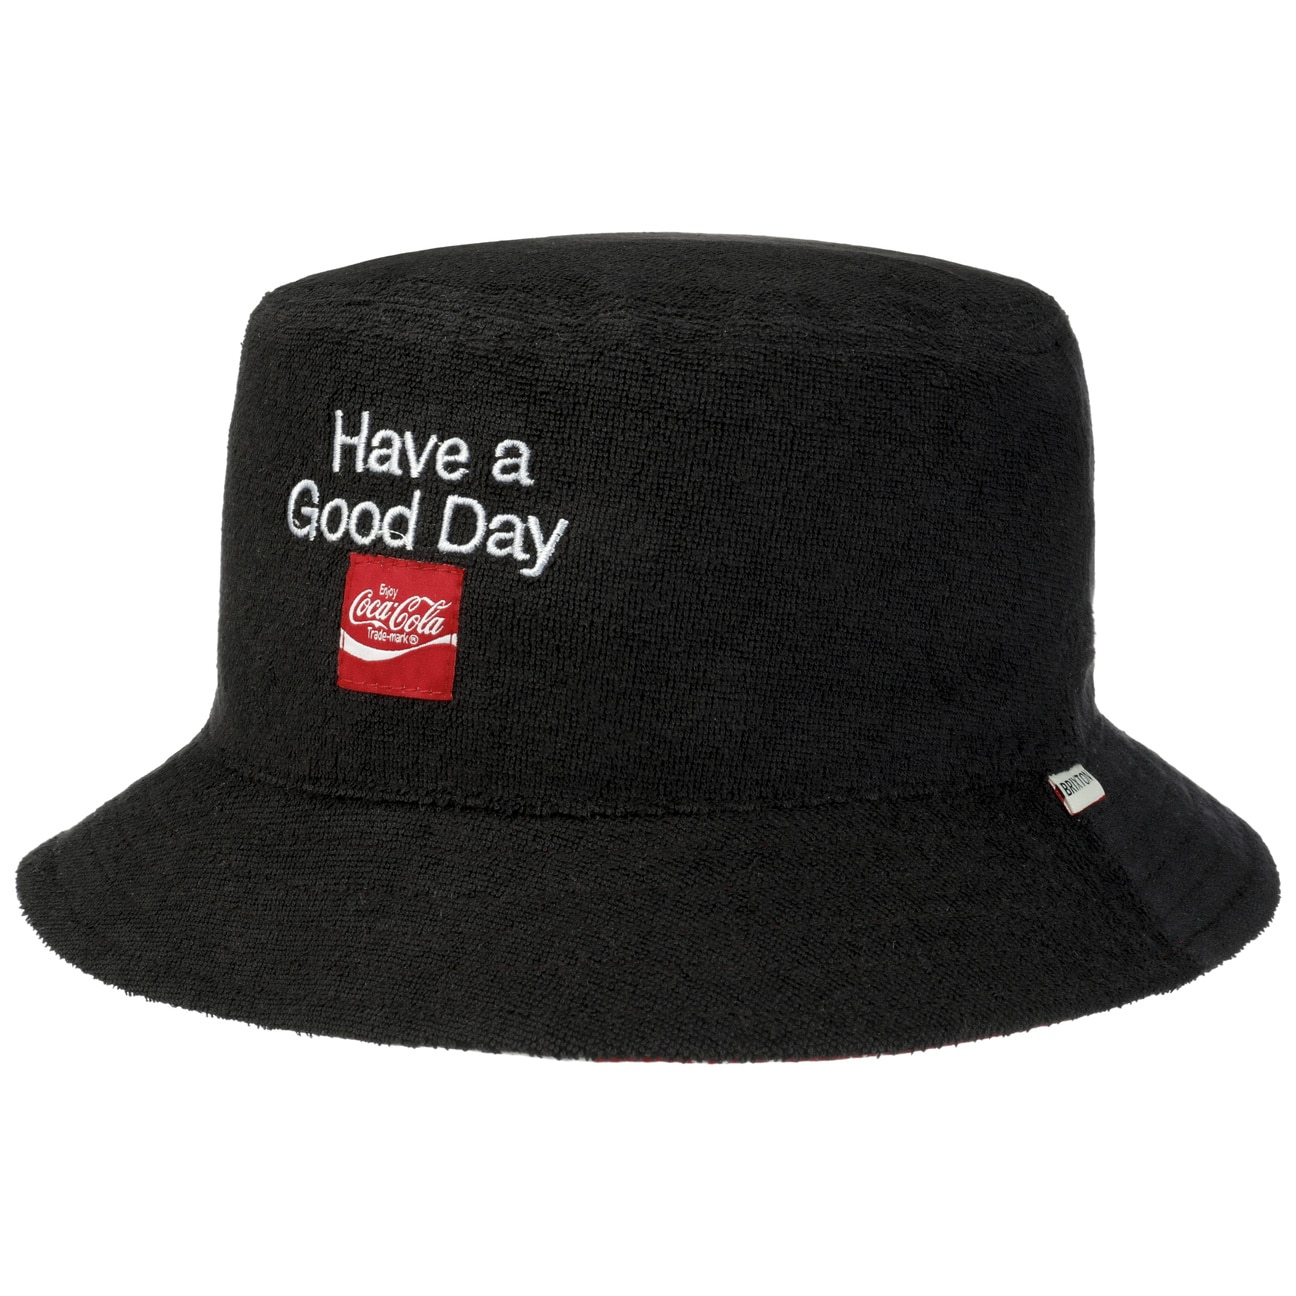 62,95 Reversible Coca-Cola Hat - Brixton Good Day € by